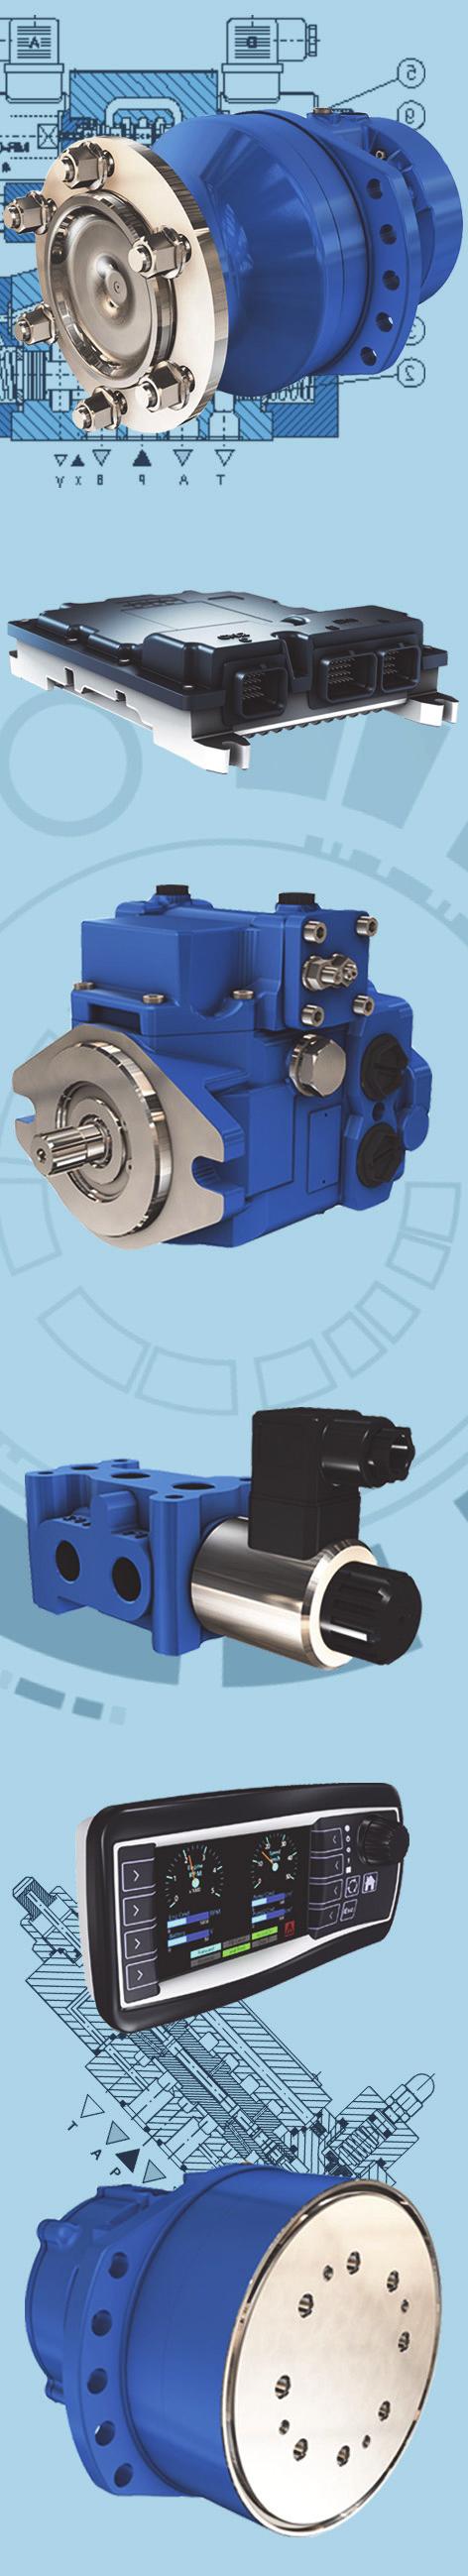 OCLAIN HYDRAULICS Hydraulic motors MZ05 - MZE05 CONTENT MODEL CODE 4 CHARACTERISTICS 7 Dimensions for standard 1-displacement motor 7 inion characteristics 8 VALVING SYSTEMS 9 Hydraulic connections 9